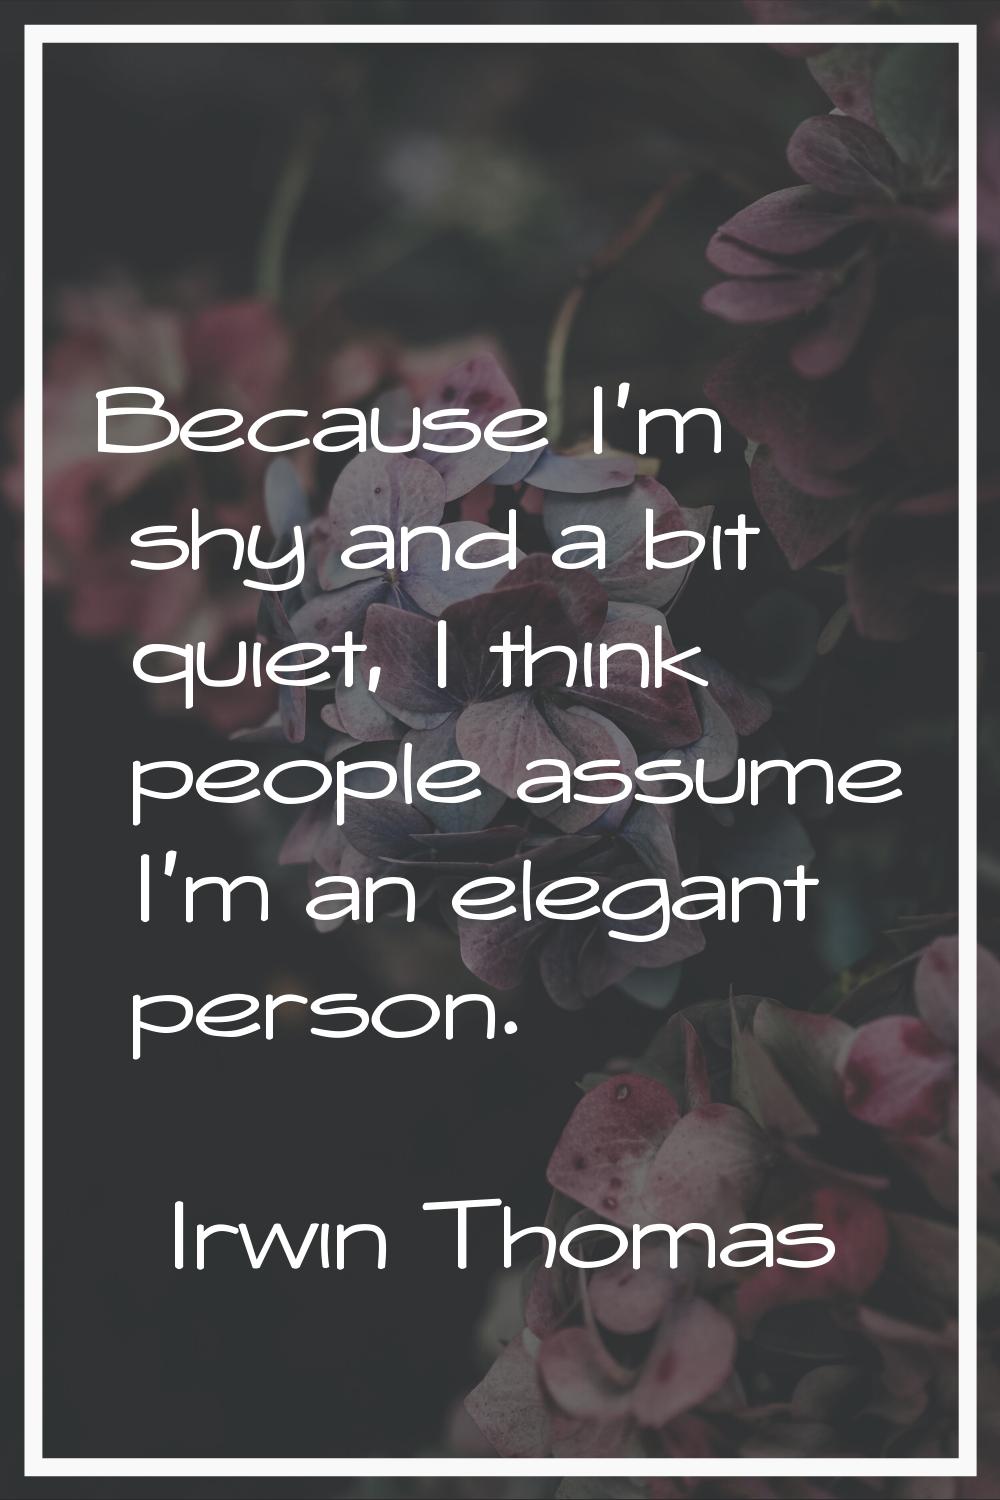 Because I'm shy and a bit quiet, I think people assume I'm an elegant person.